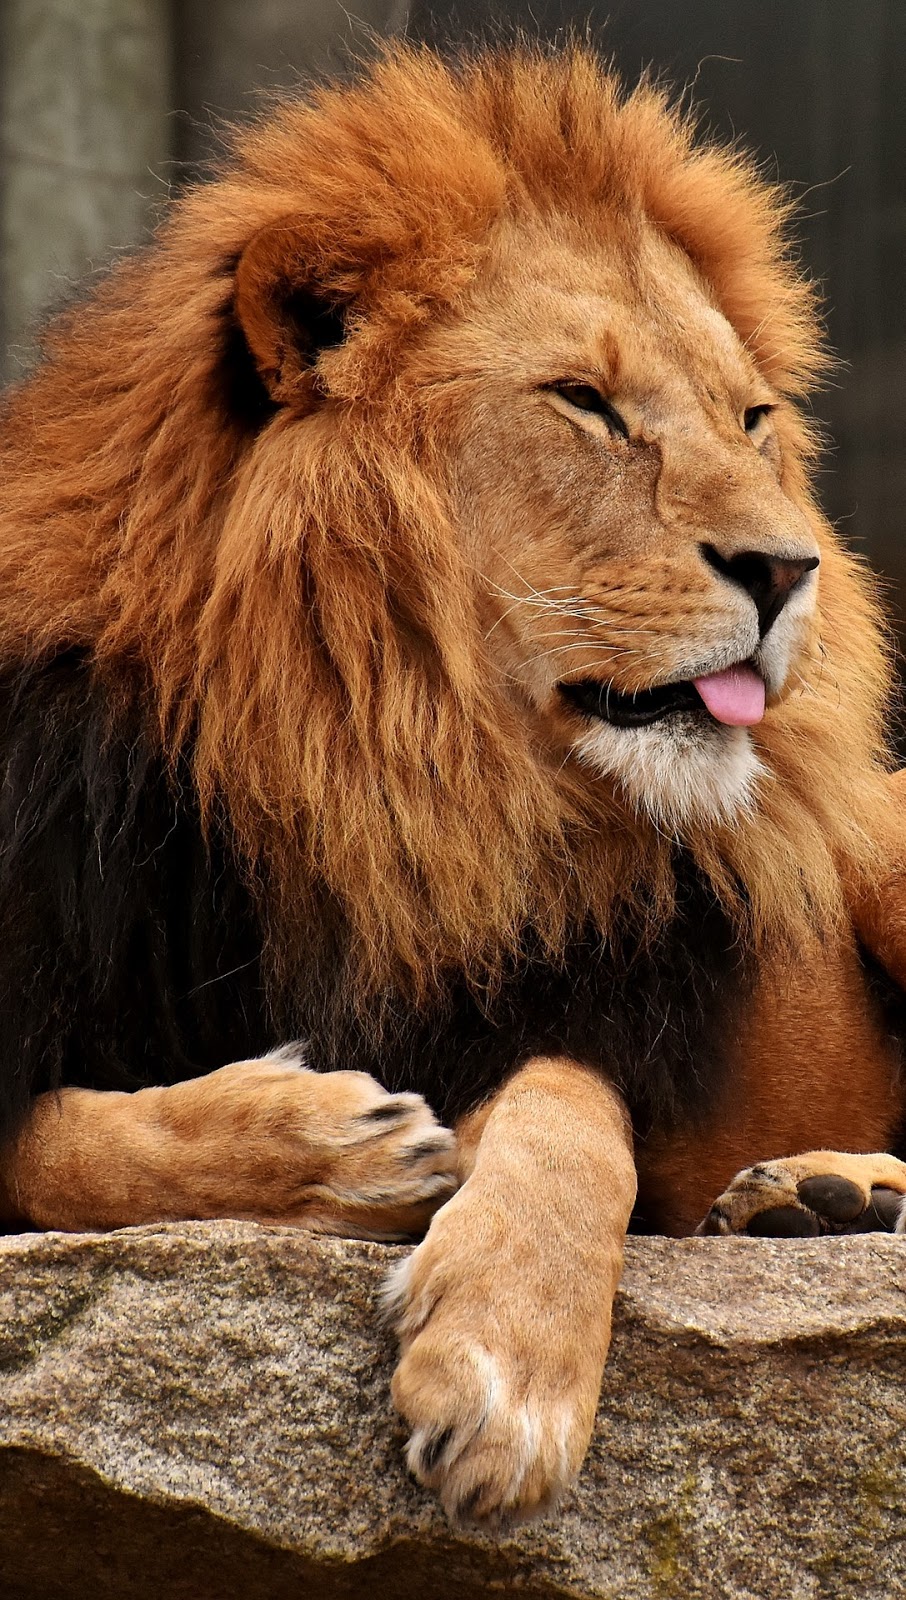 A lion with tongue sticking out